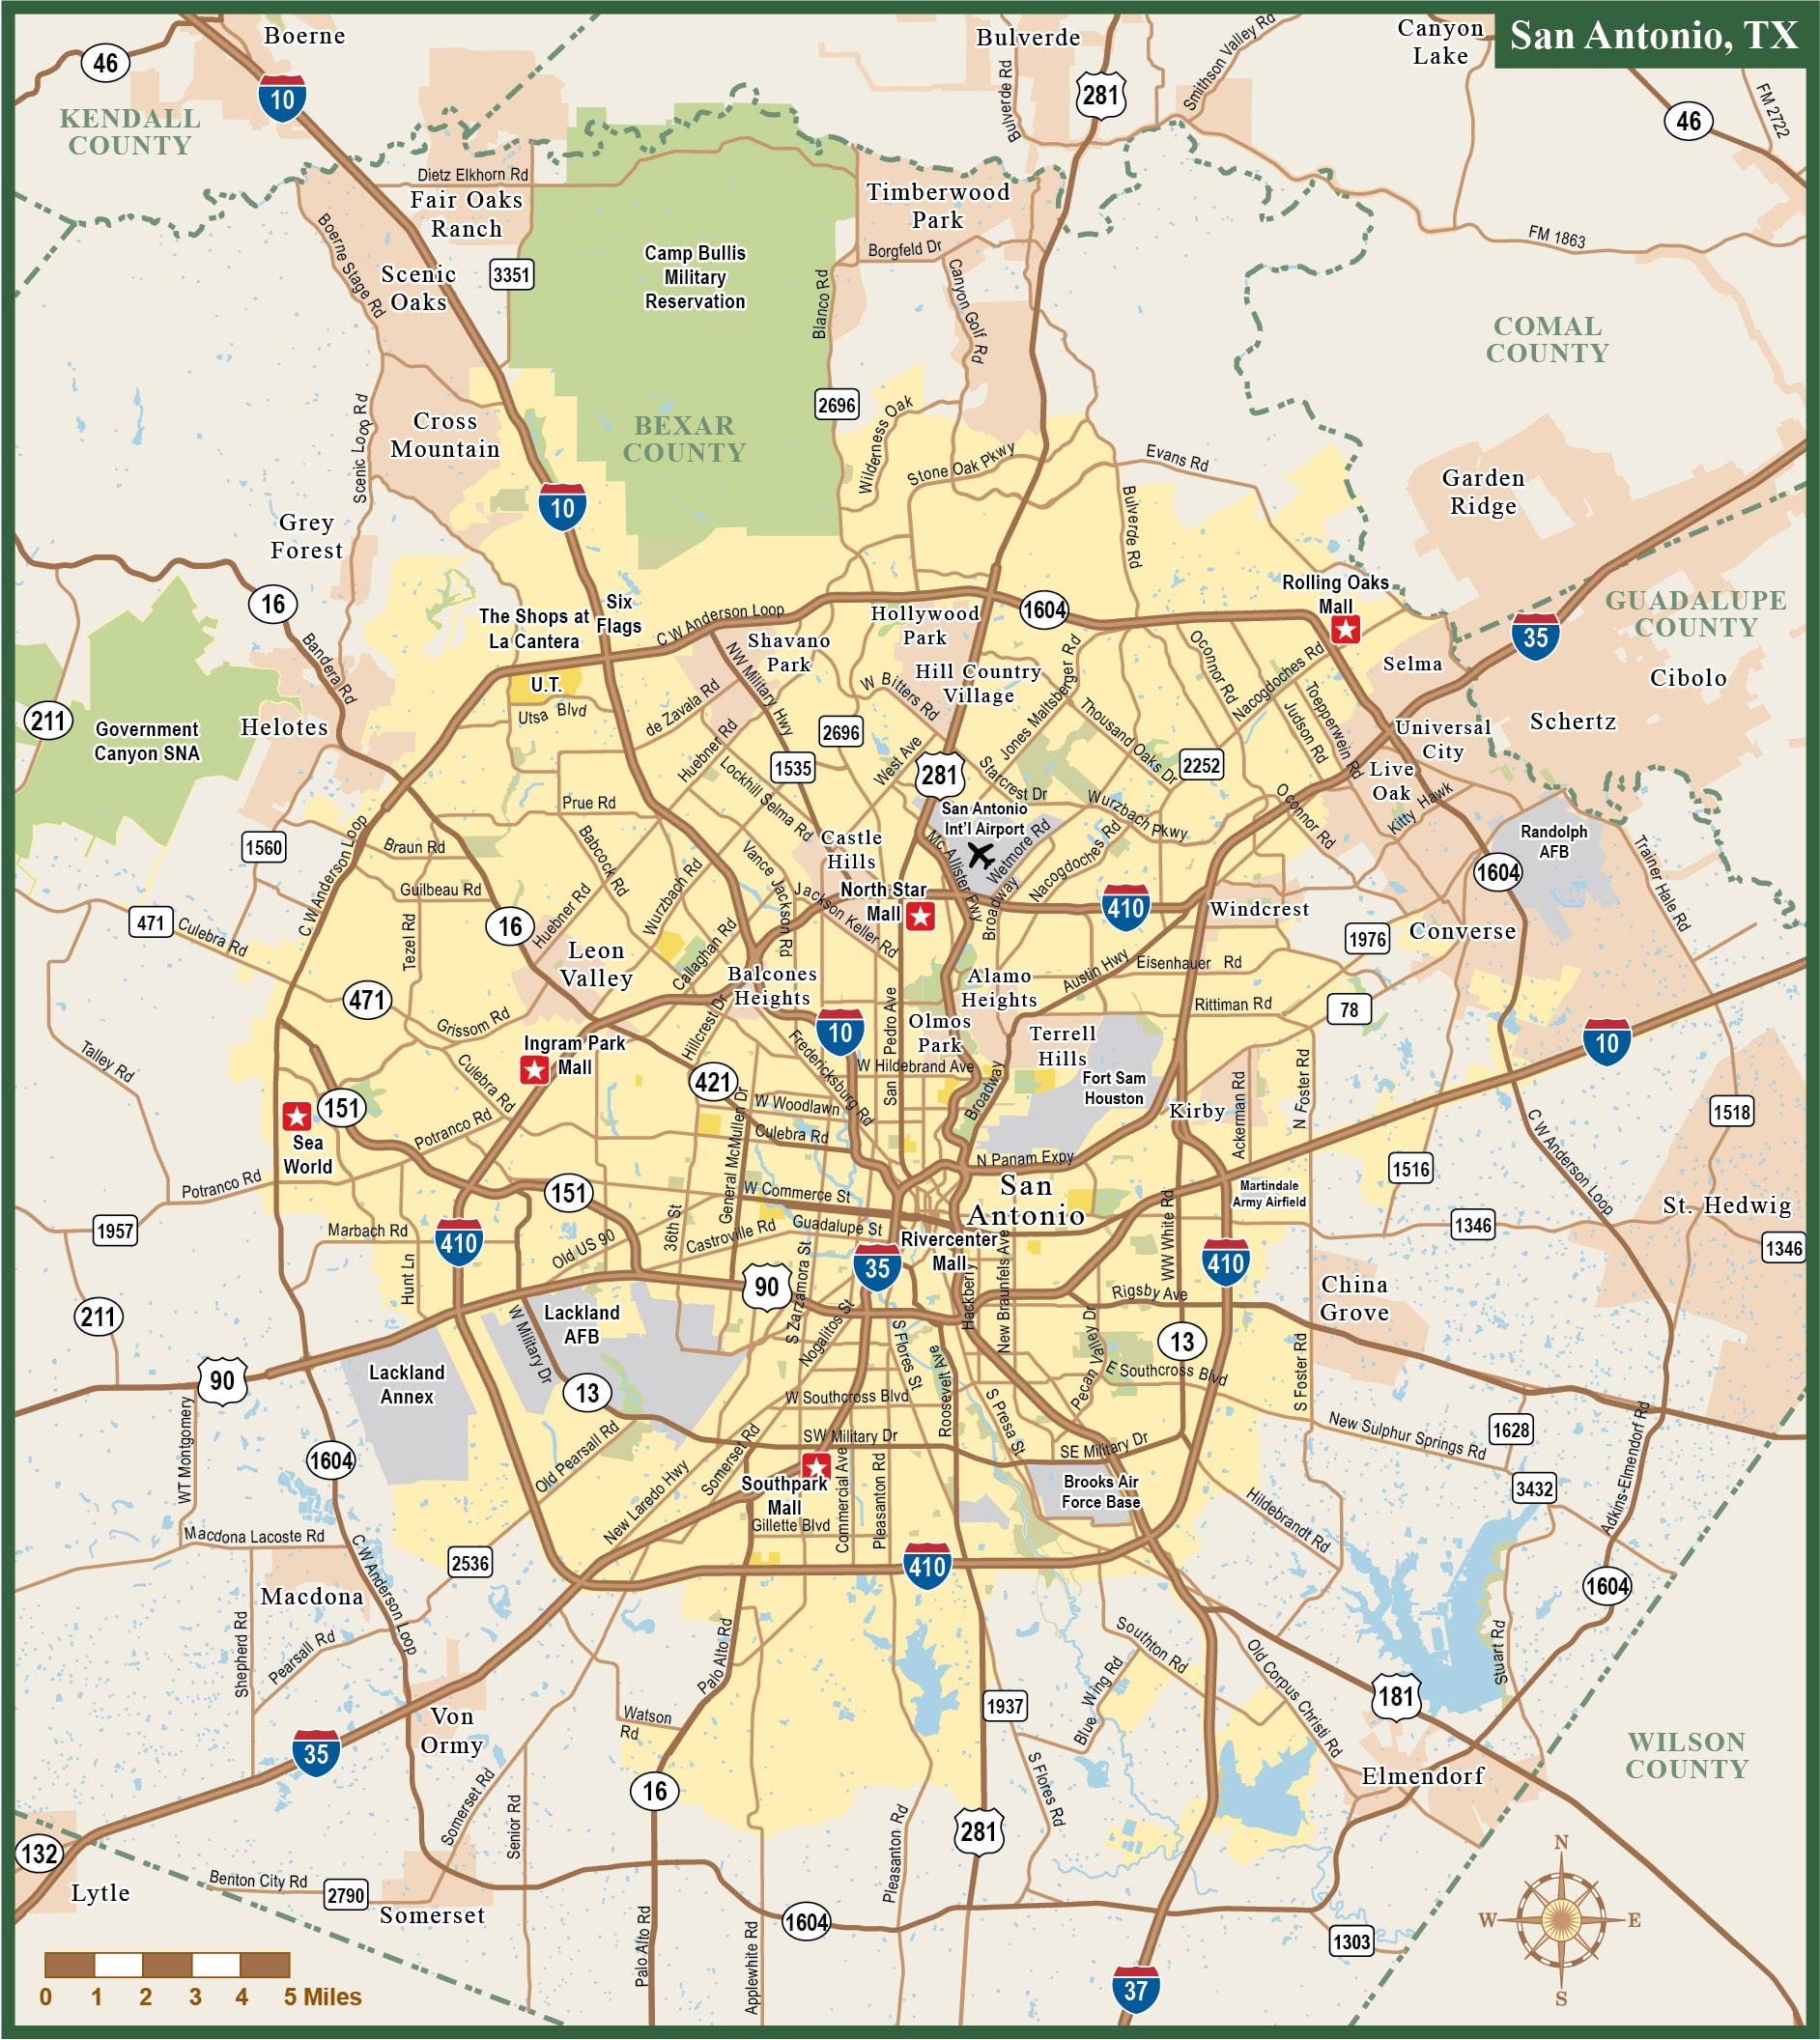 Map Of San Antonio And Surrounding Cities - Issie Leticia